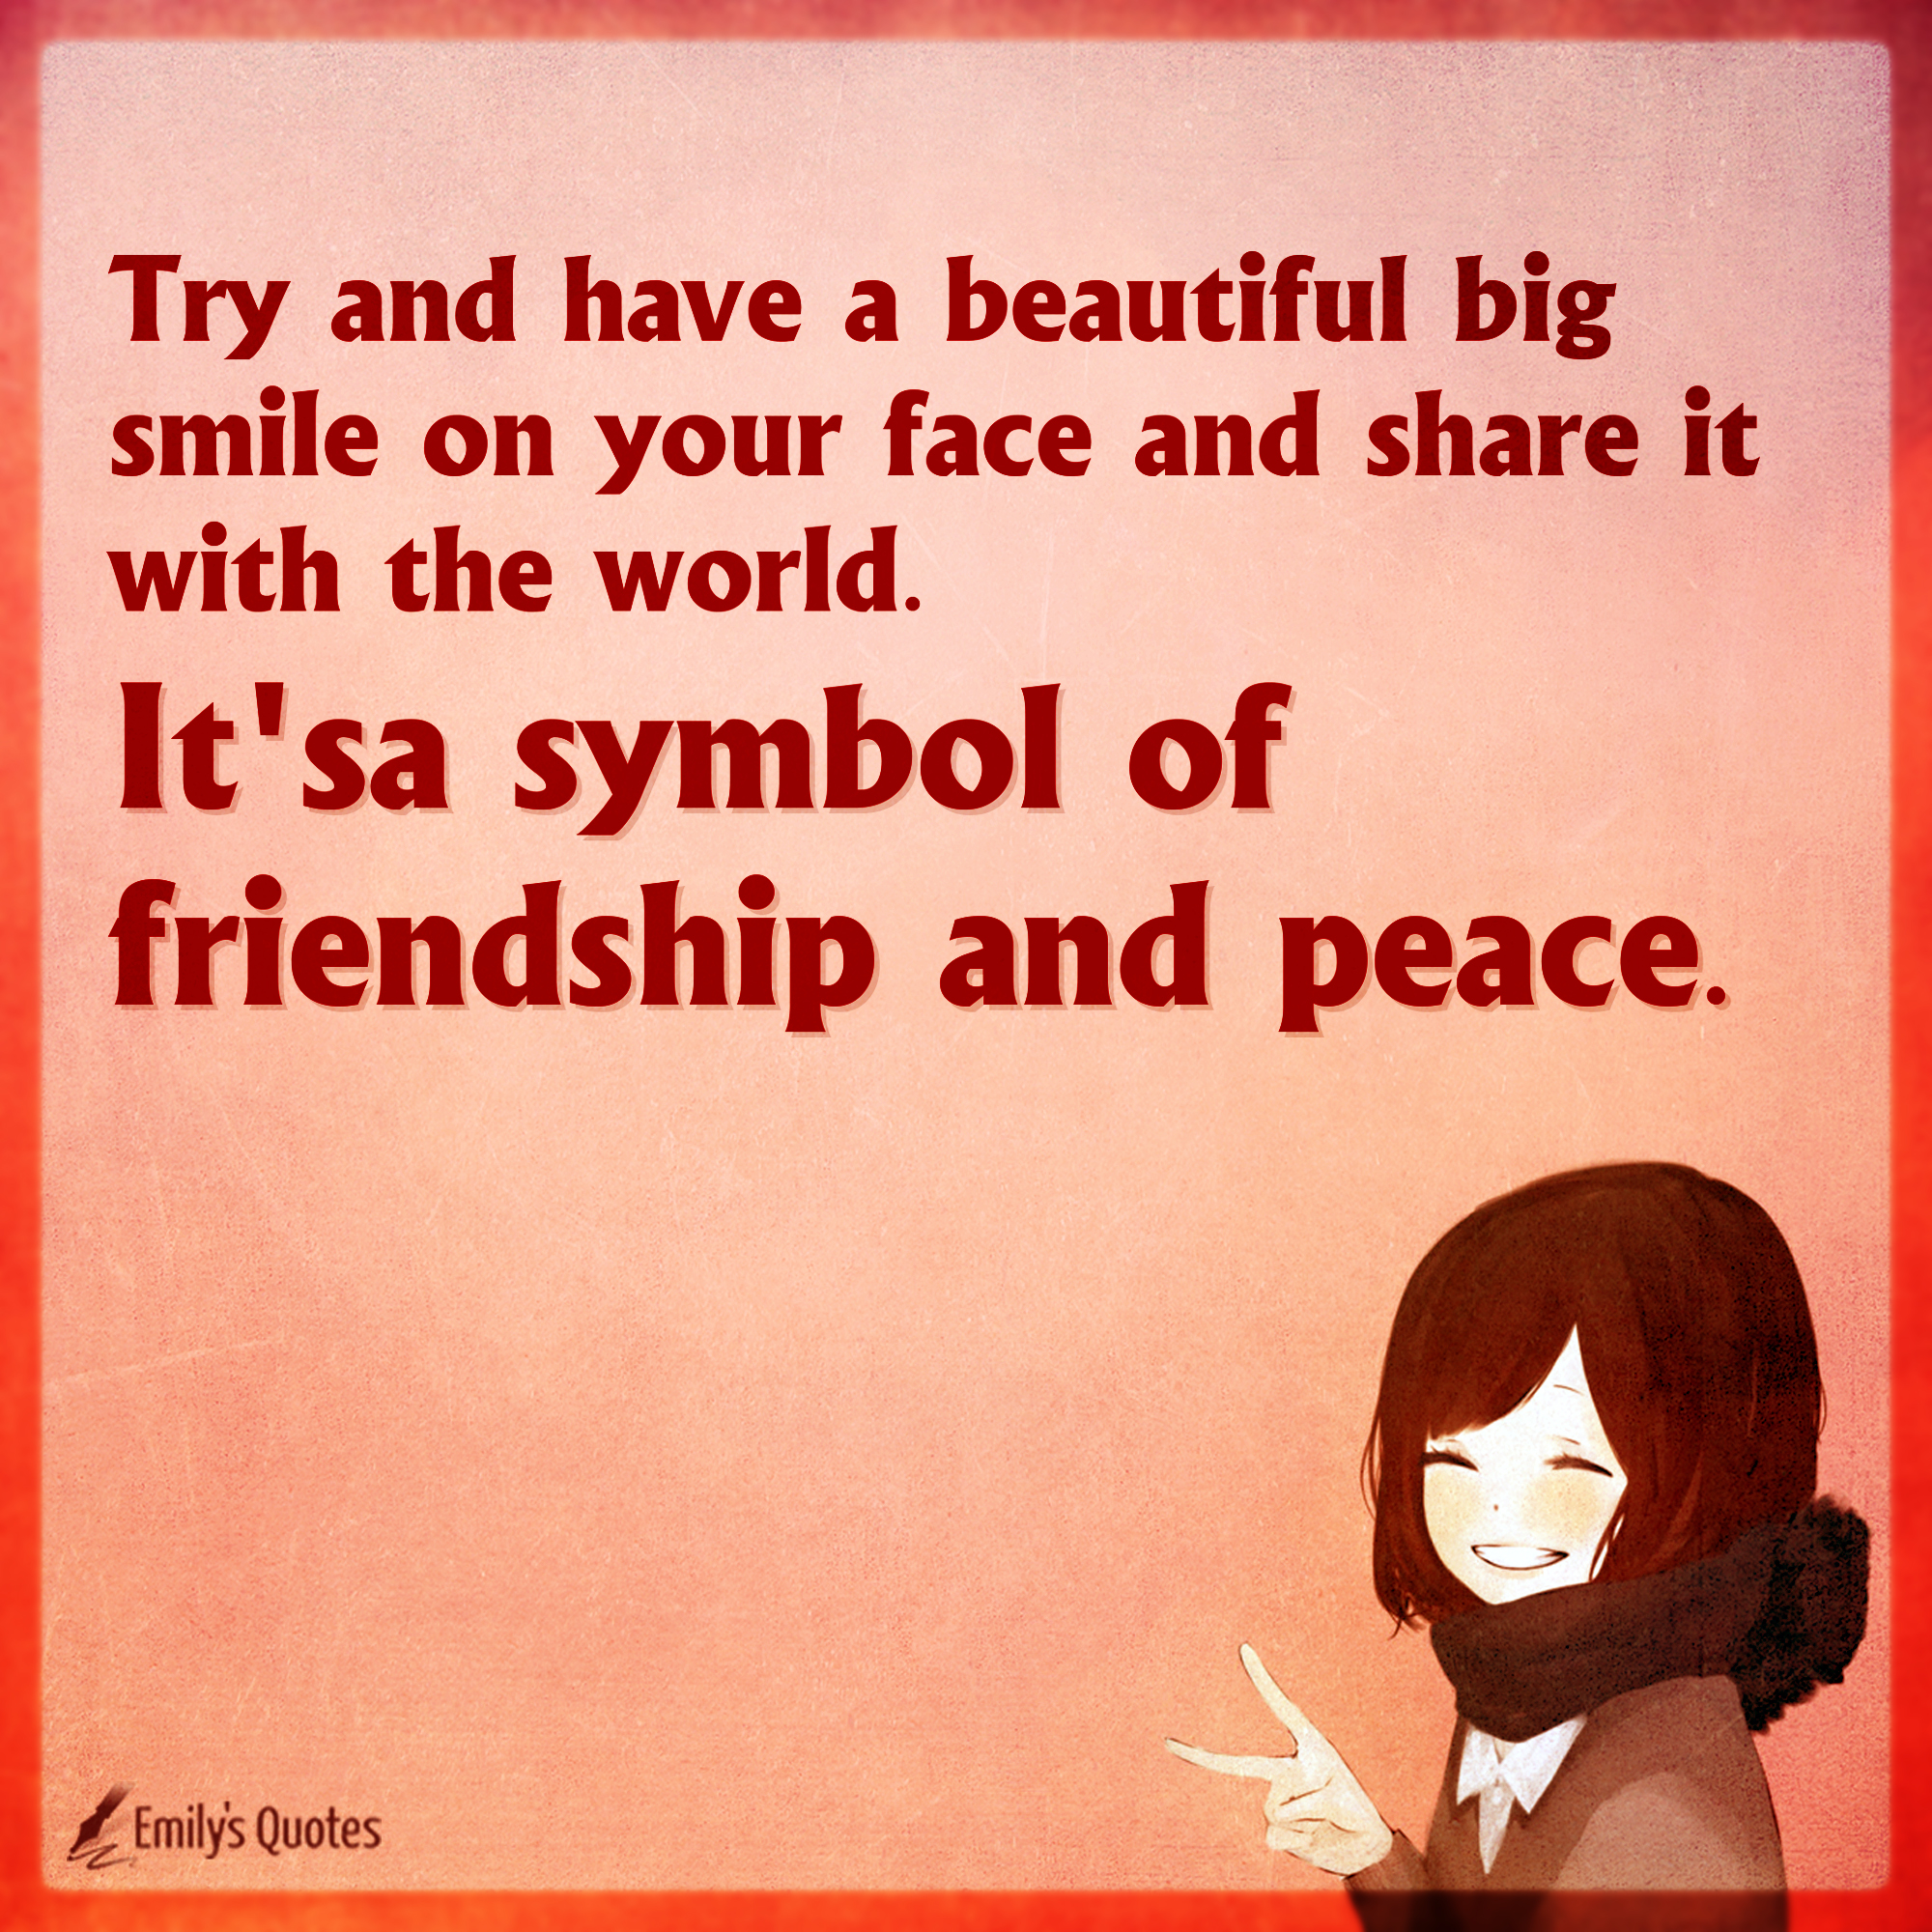 Try and have a beautiful big smile on your face and share it with the world